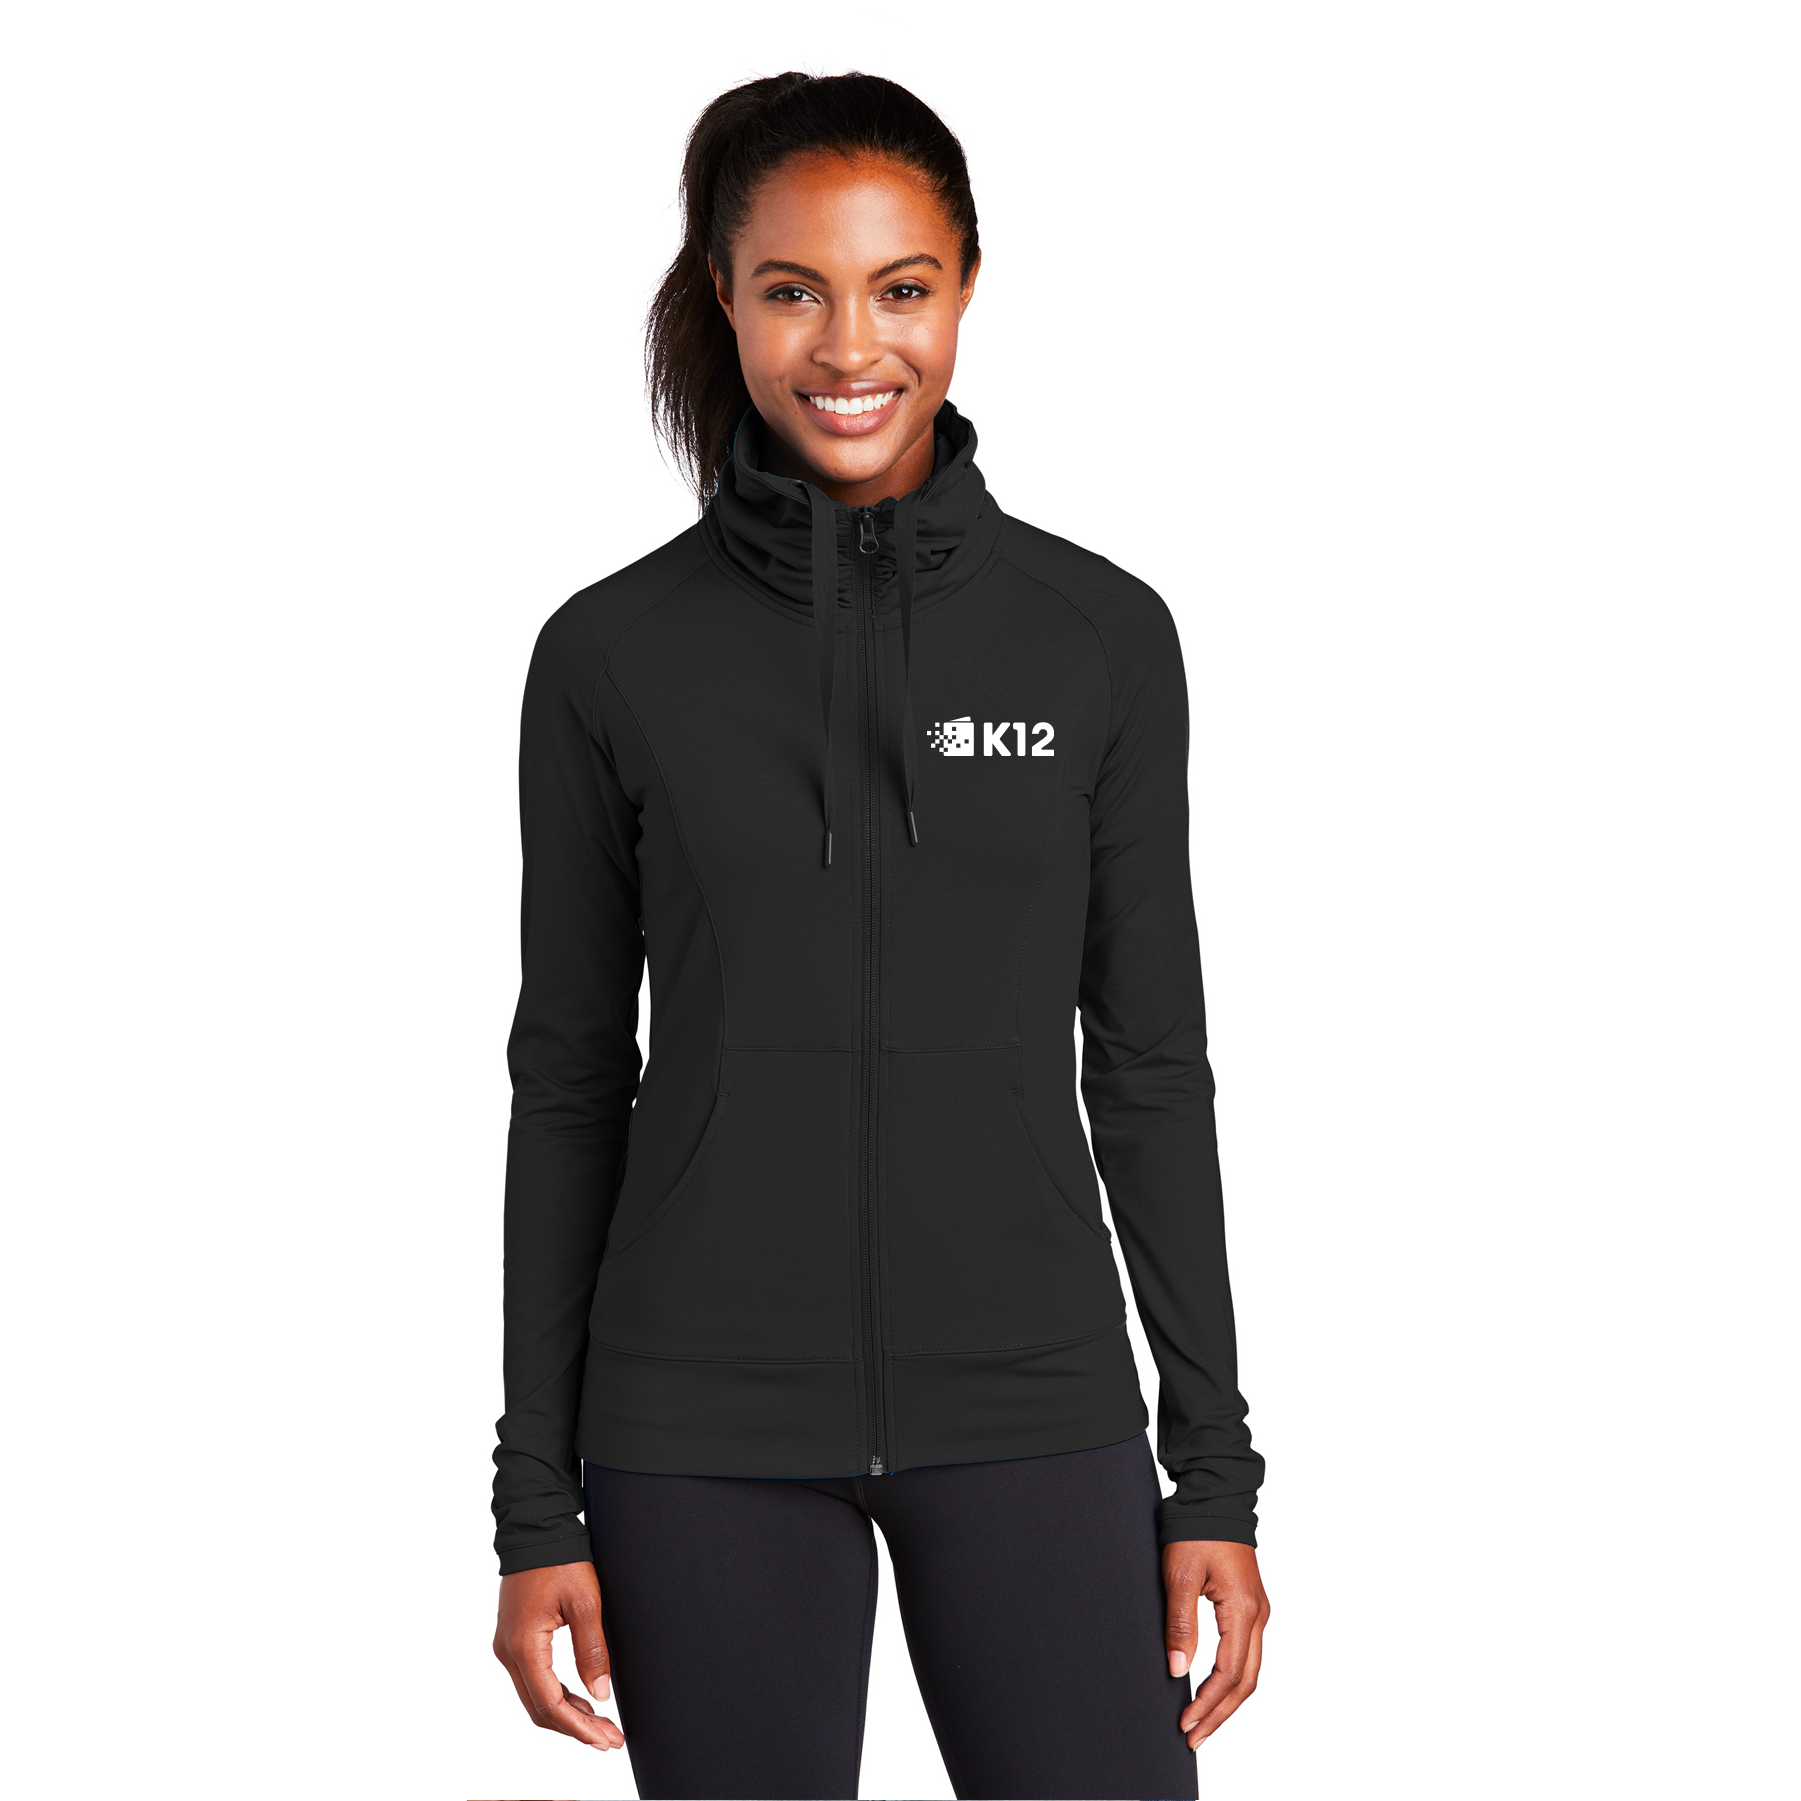 K12 EMBROIDERED SPORT-WICK STRETCH FULL-ZIP JACKET